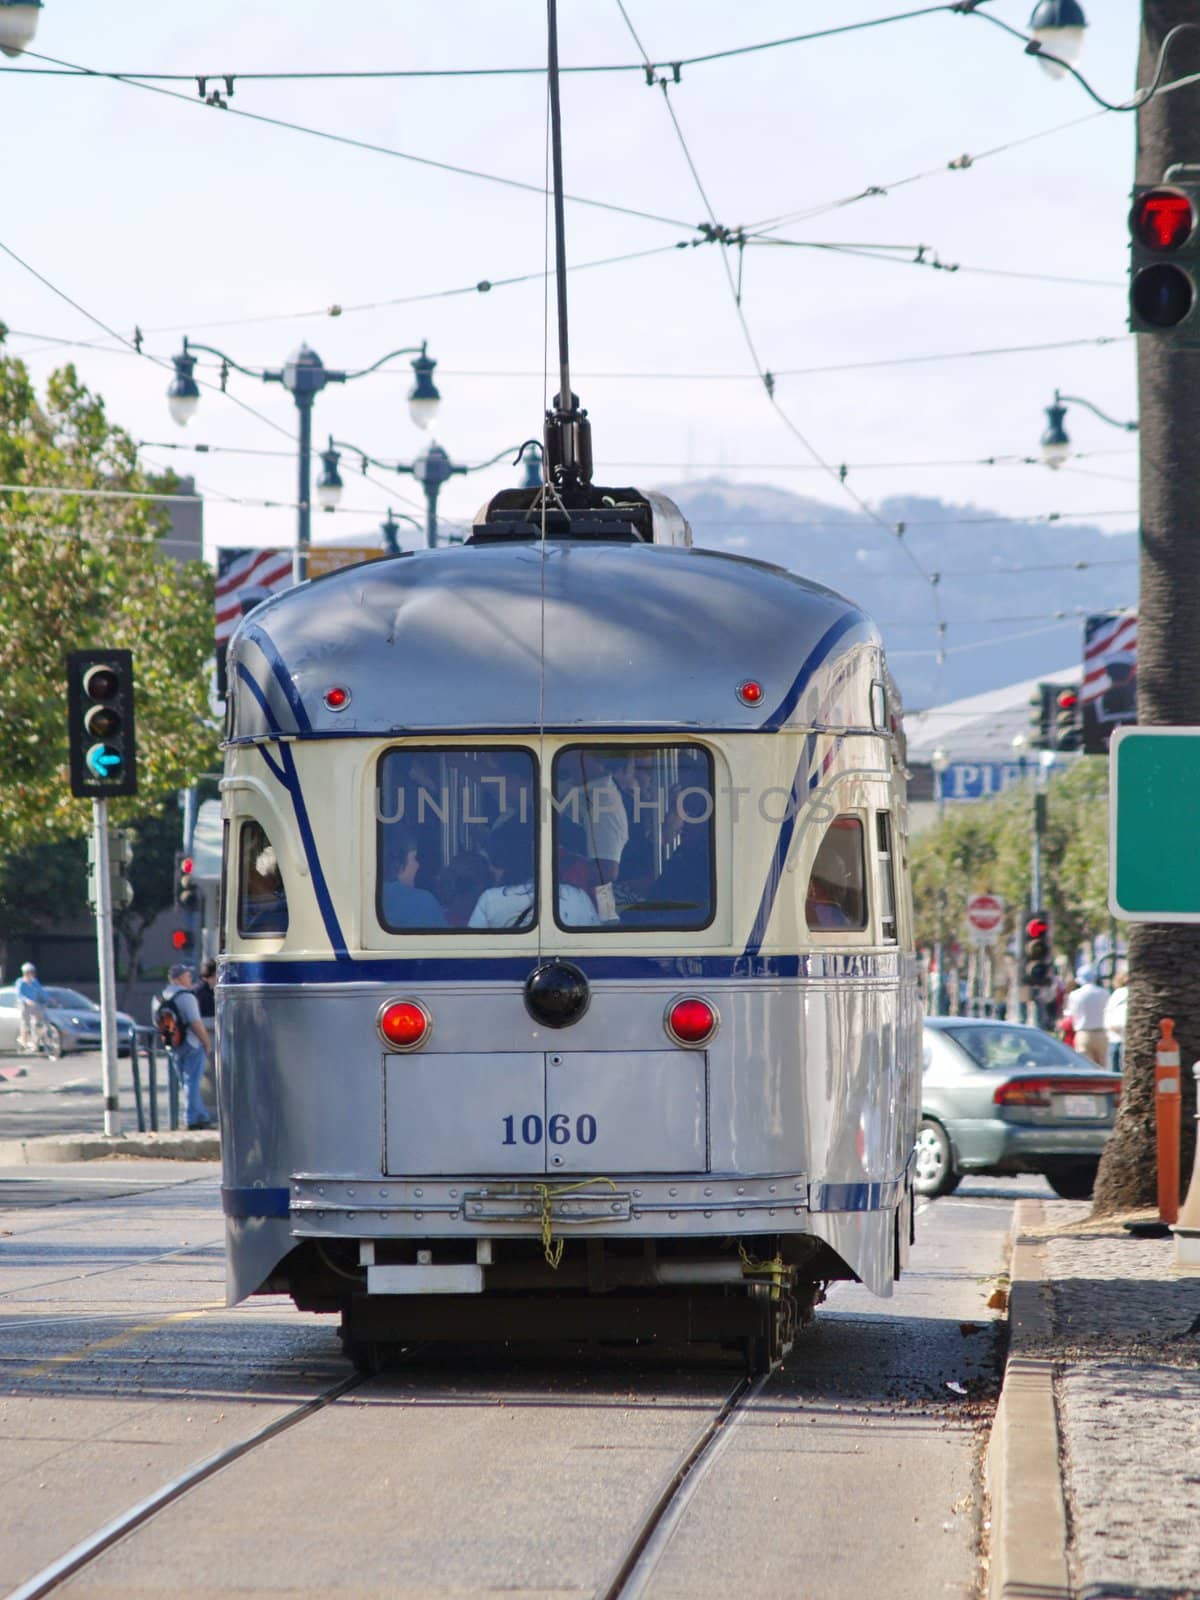 Tram in San Francisco by anderm